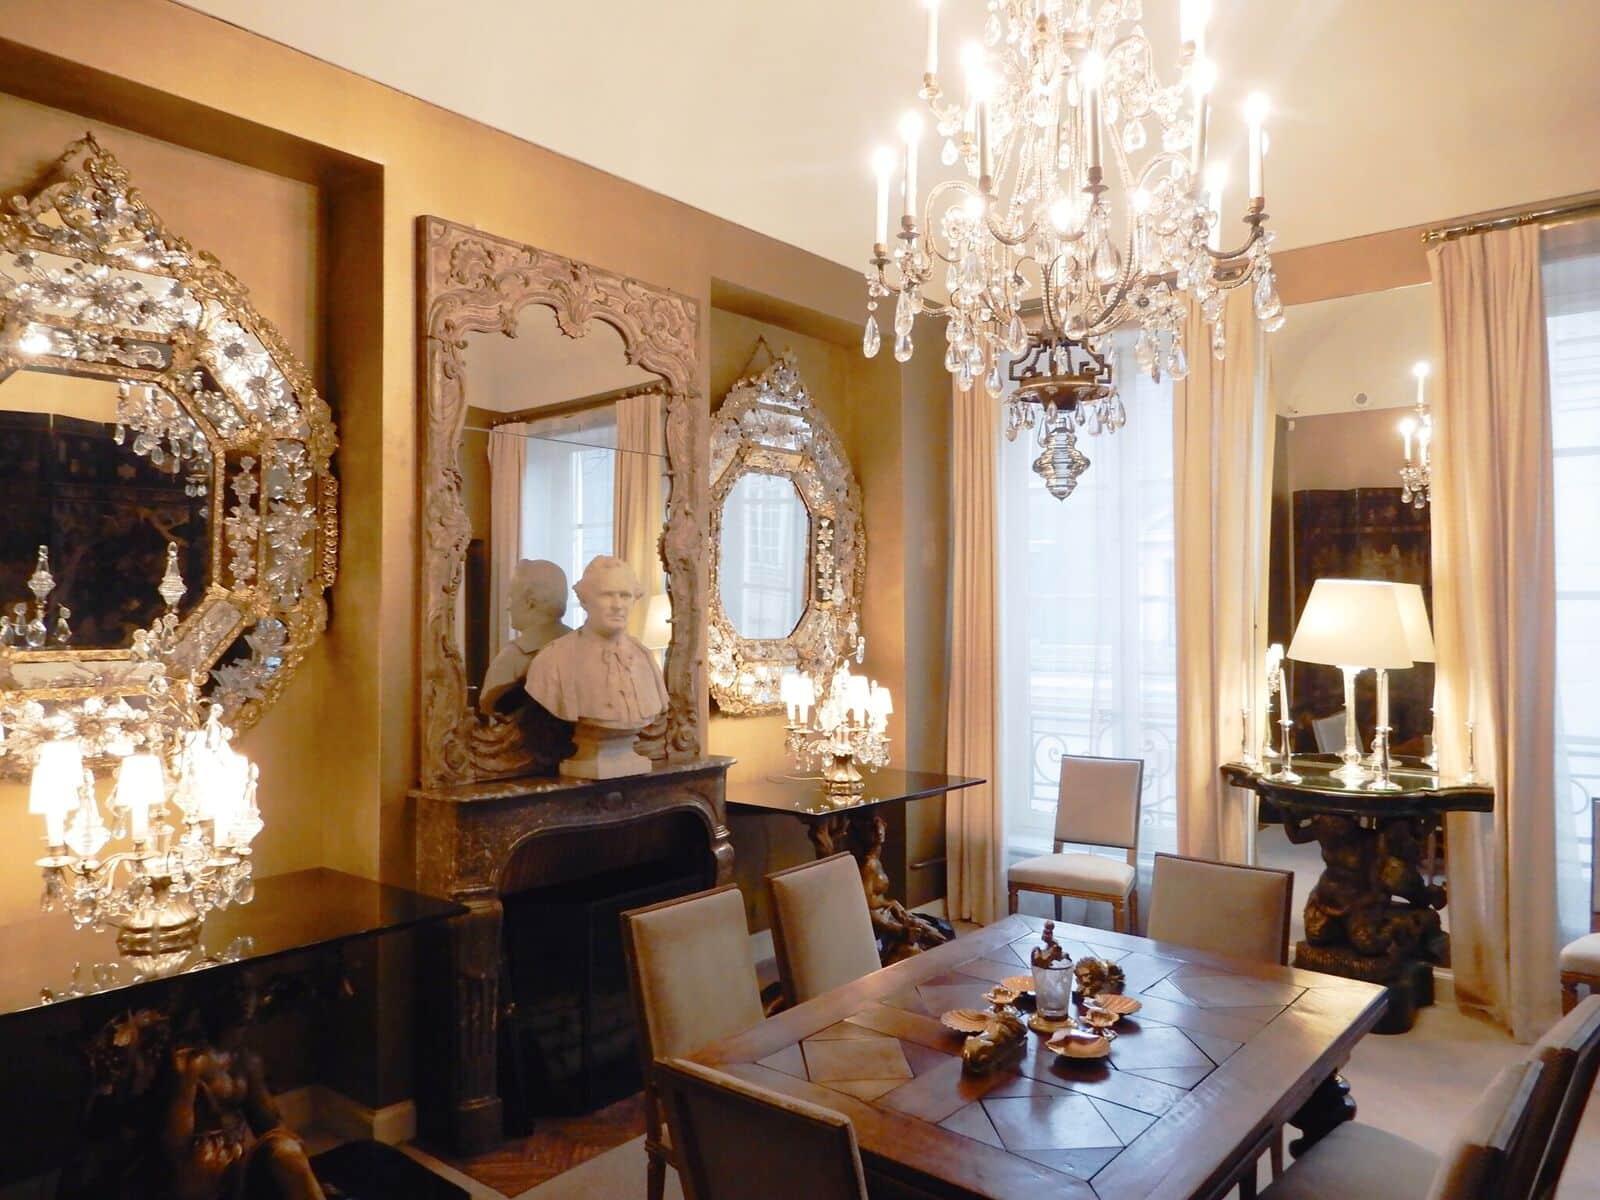 An inside look of Coco Chanel's iconic Parisian apartment